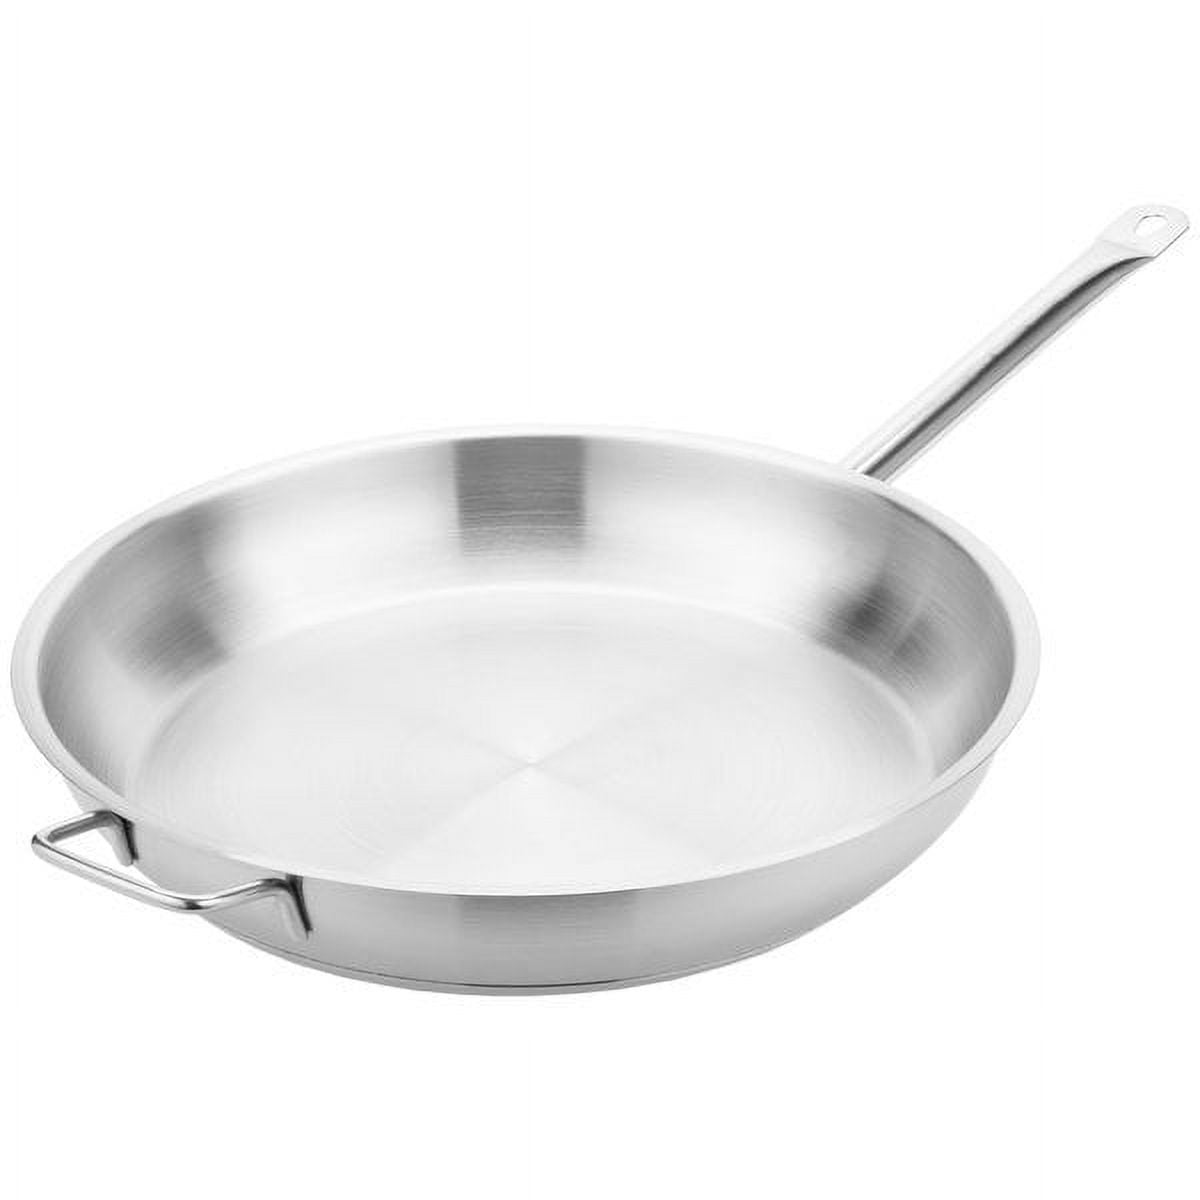 Vigor SS1 Series 14 Stainless Steel Fry Pan with Aluminum-Clad Bottom and  Helper Handle